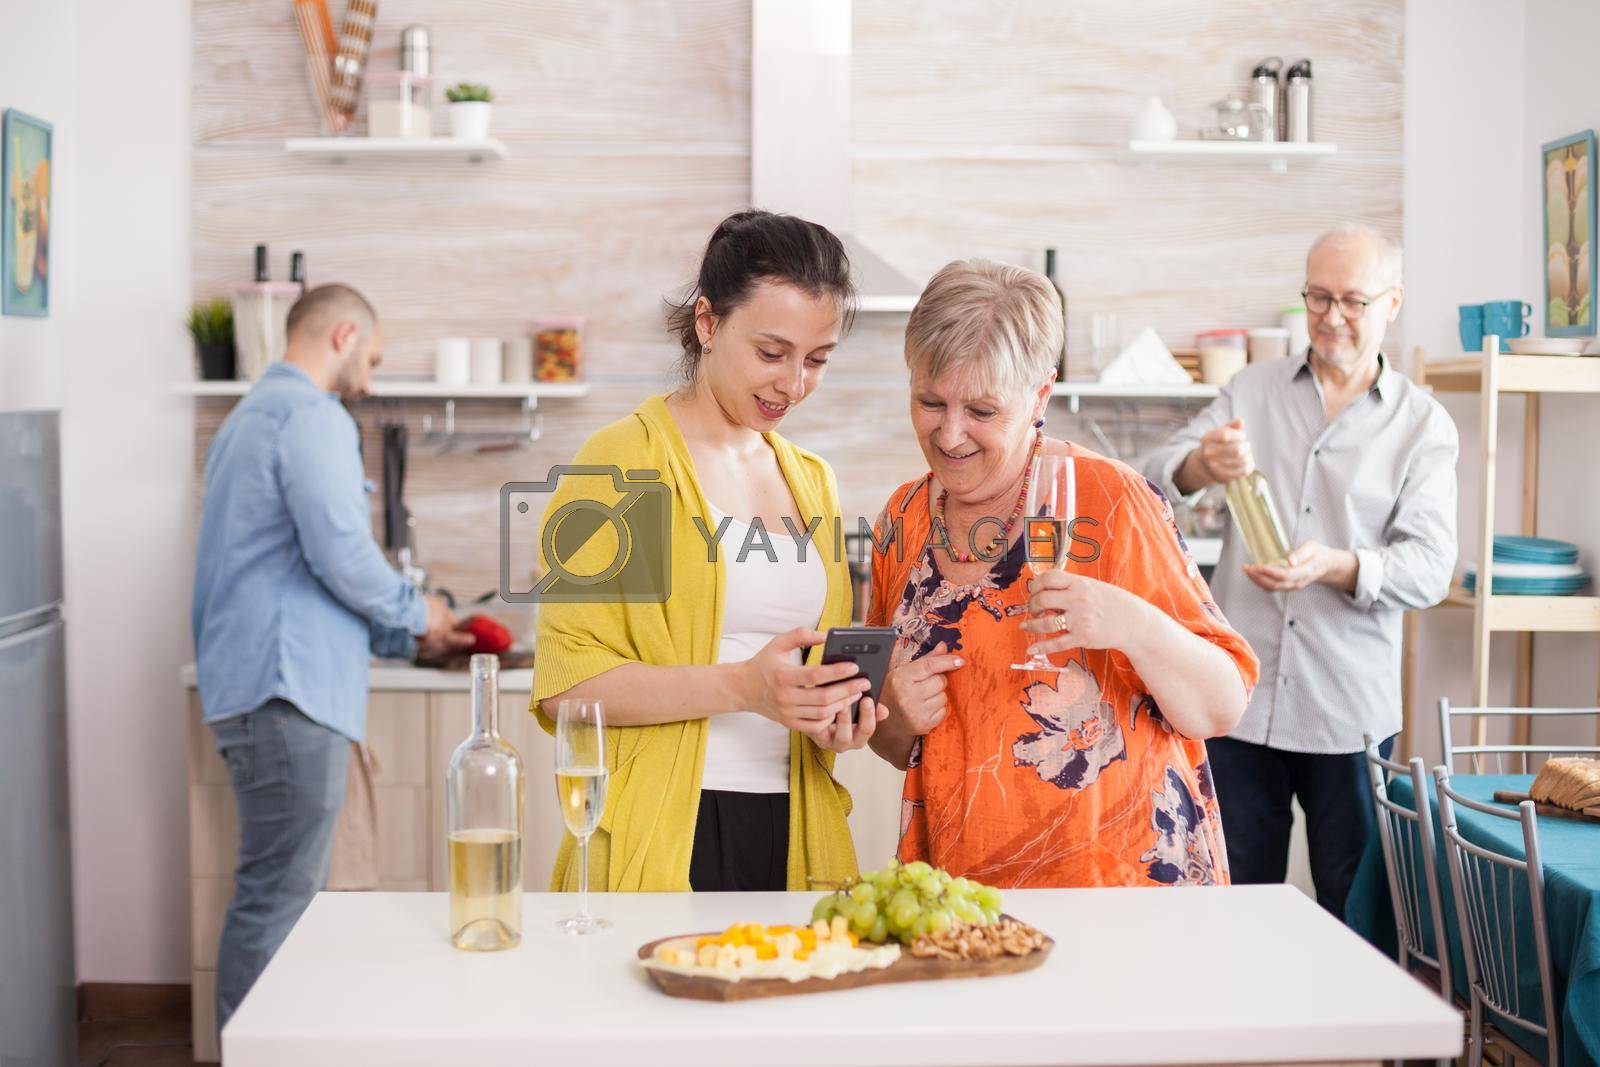 Mother and daughter browsing on smartphone in kitchen during family brunch. Senior woman holding glass of white wine. Tasty appetizer.